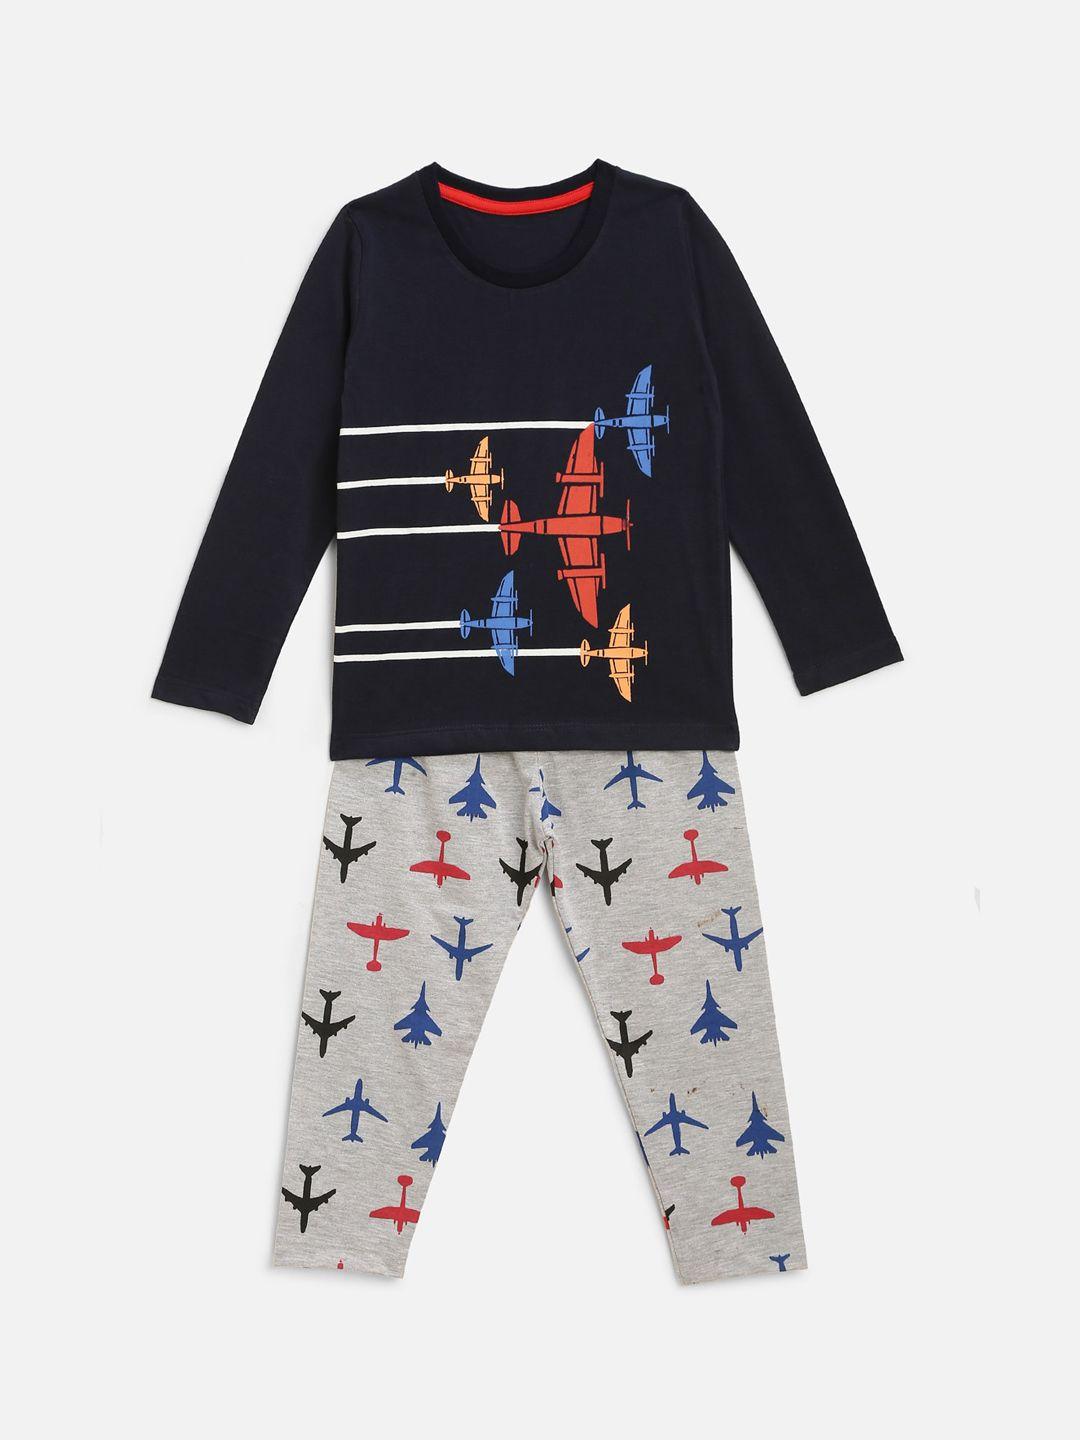 here&now boys navy blue & grey printed night suit